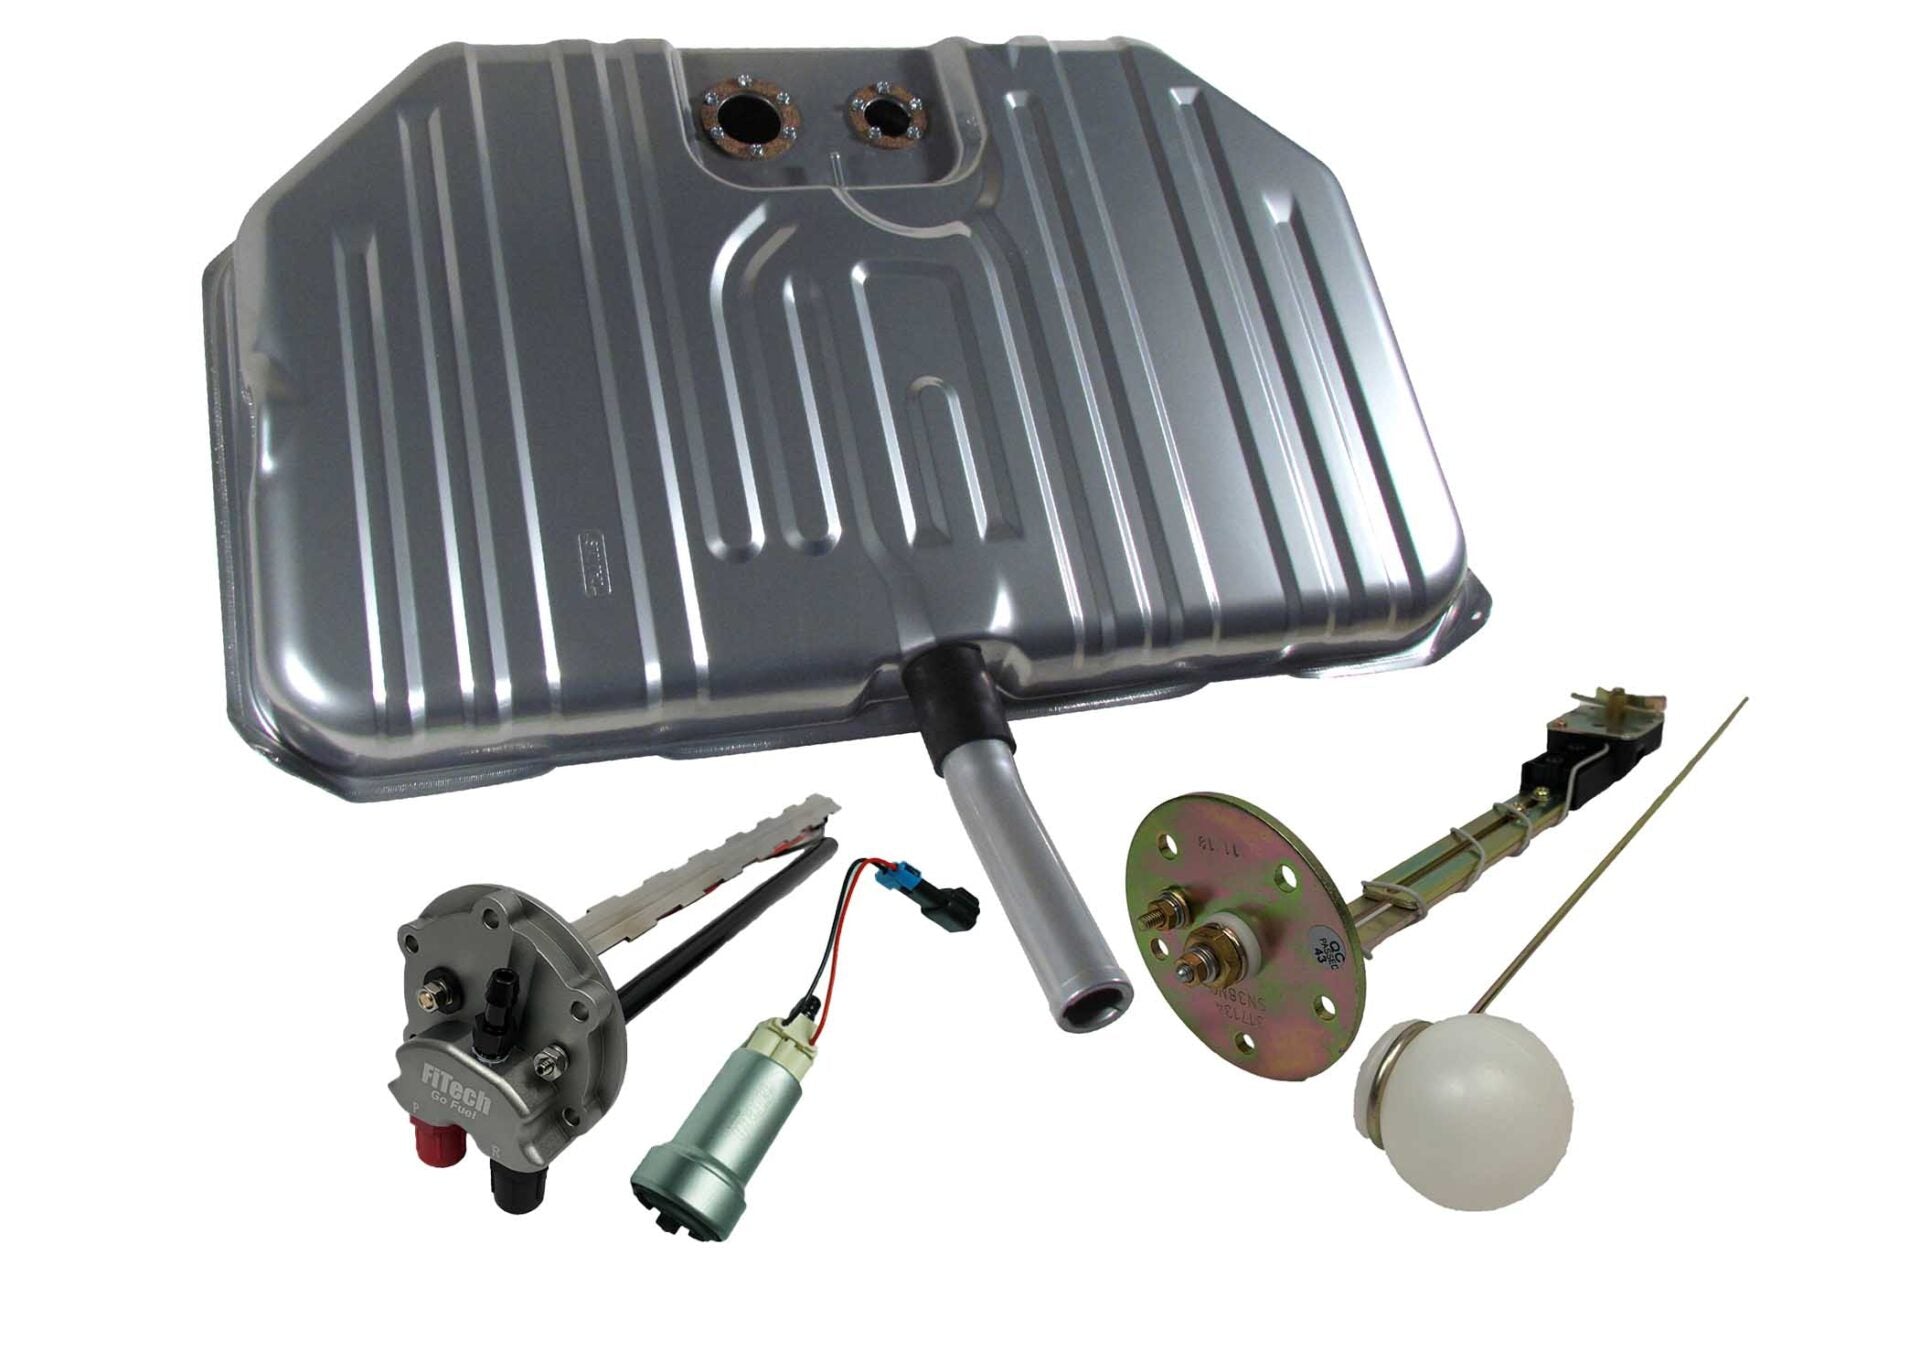 FiTech 58128 Go Fuel 440 LPH EFI Fuel Tank Kit, 1970 Chevy Chevelle Notched